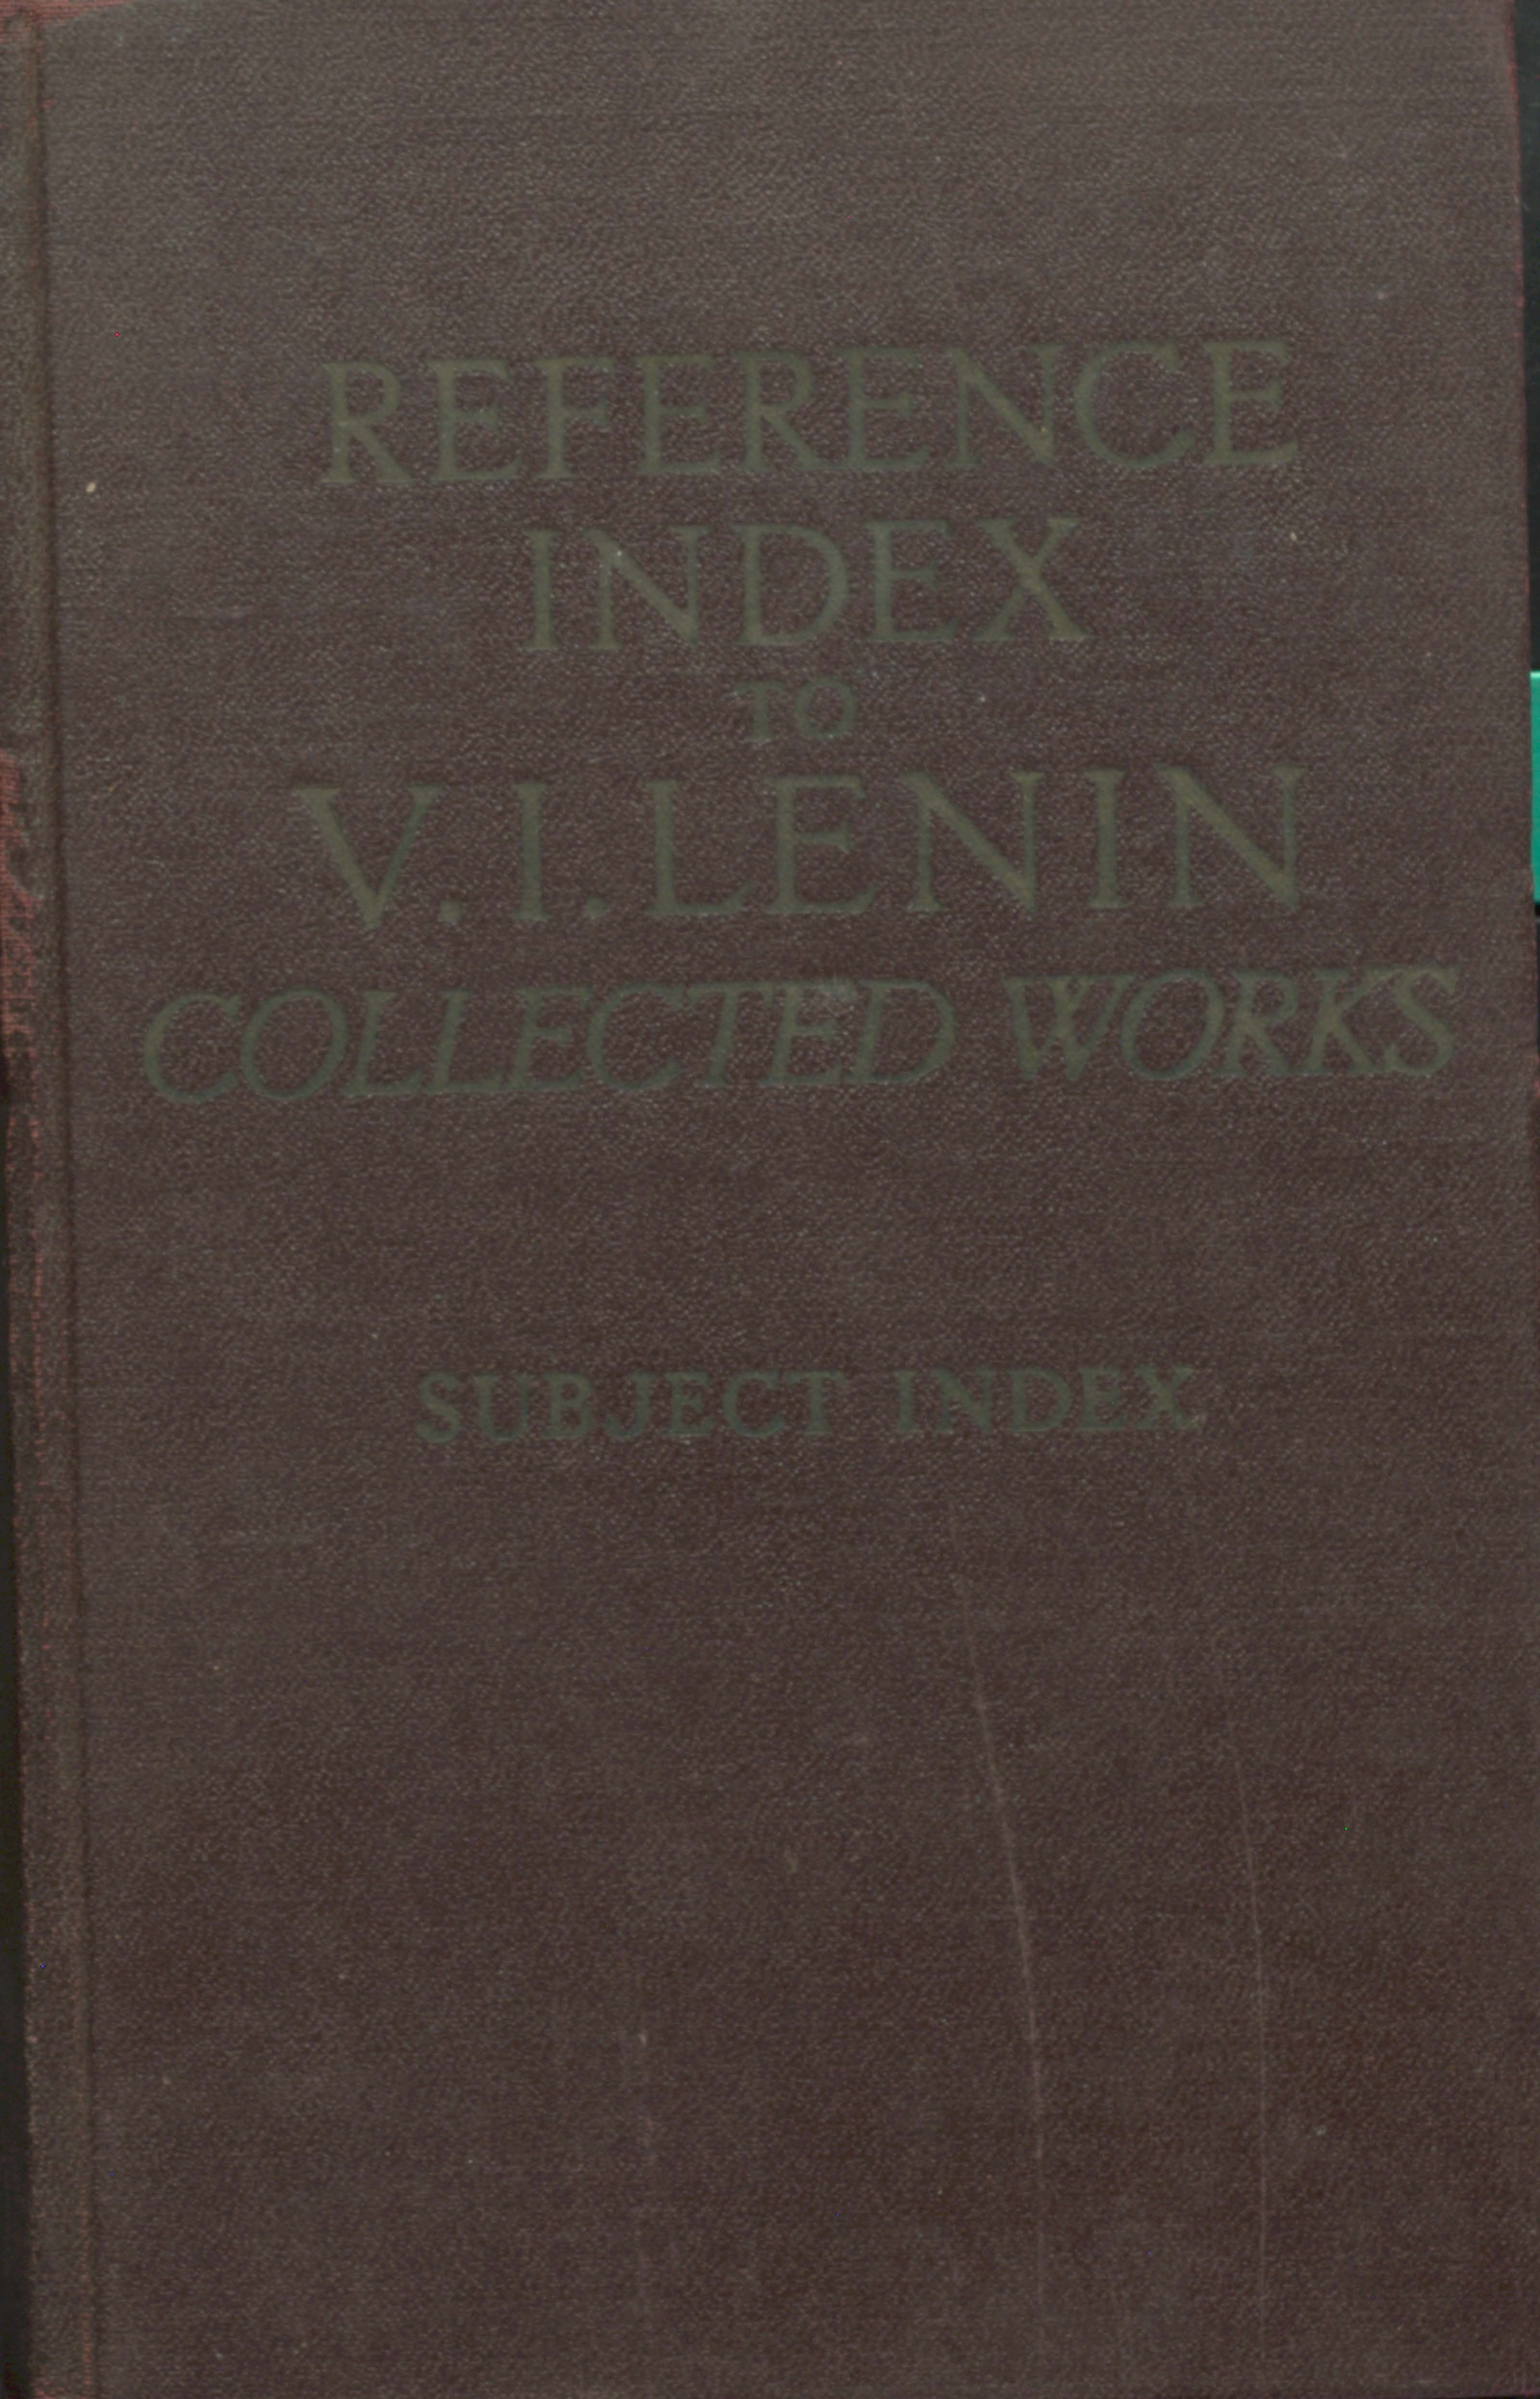 Reference index to V.L.Lenin collected works (part-two)